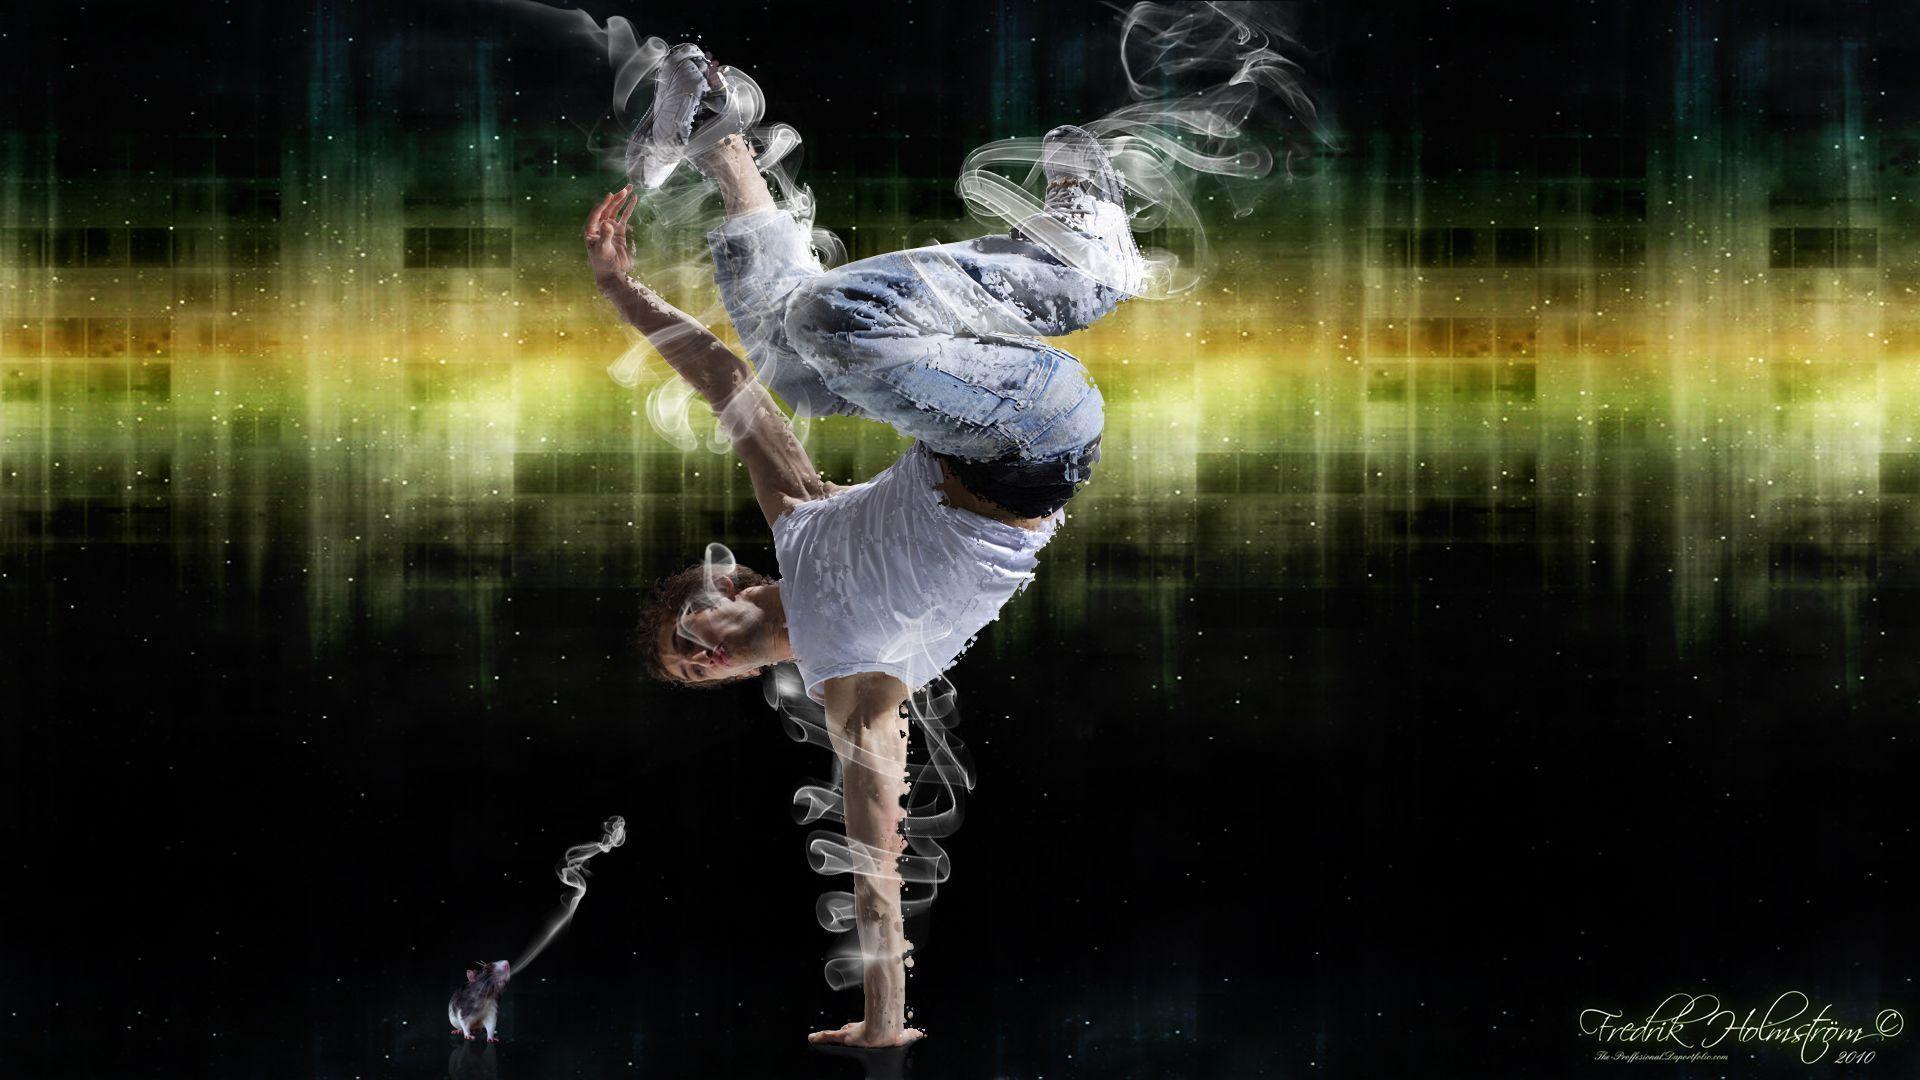 Street Dancer Wallpaper By The Proffesional